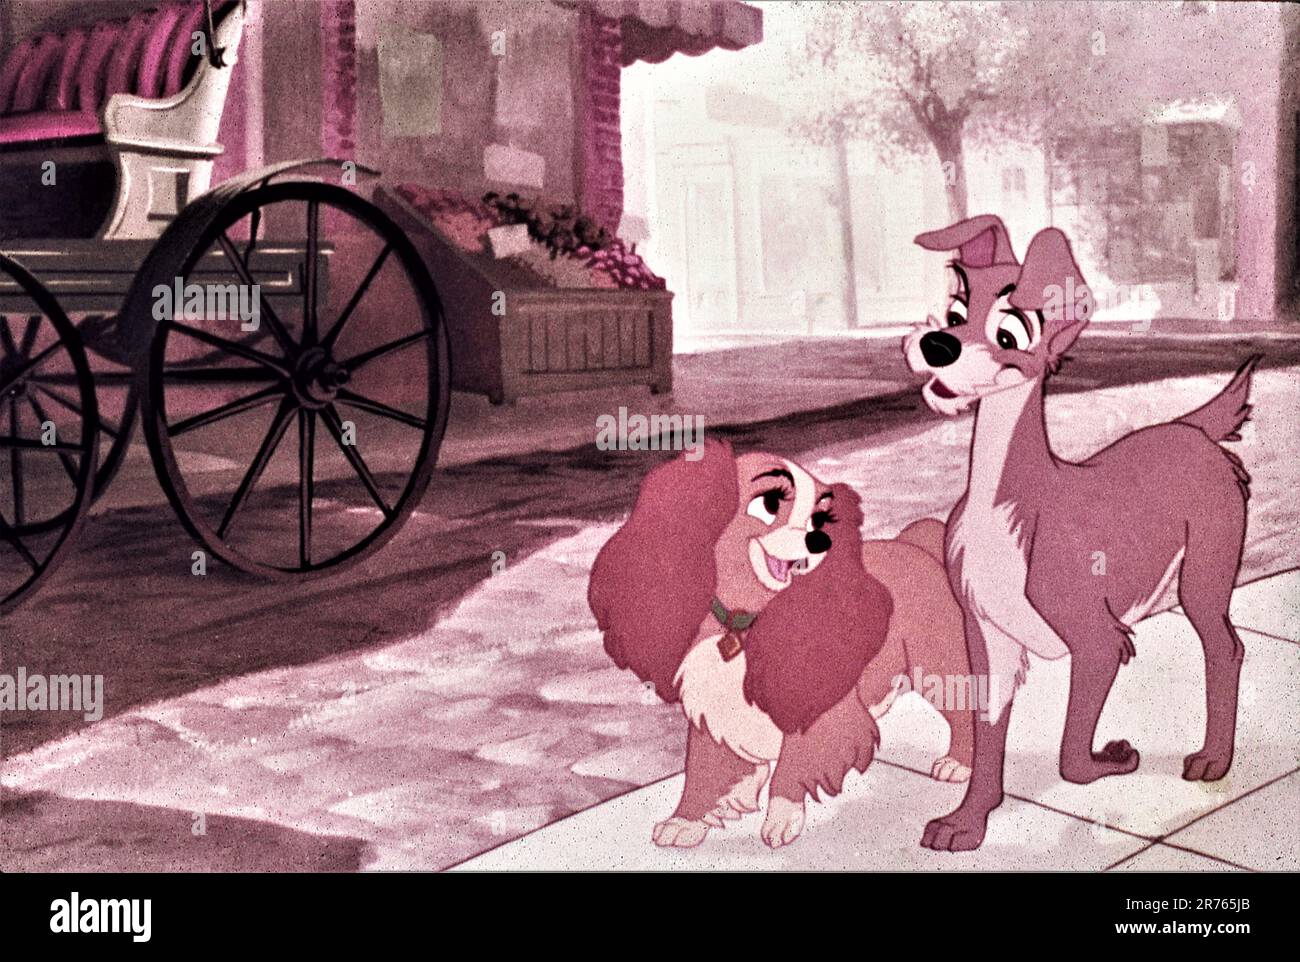 WALT DISNEY'S LADY AND THE TRAMP 1955 directors CLYDE GERONIMI WILFRED JACKSON and HAMILTON LUSKE from the story by Ward Greene Walt Disney productions / Buena Vista Film Distribution Company Stock Photo